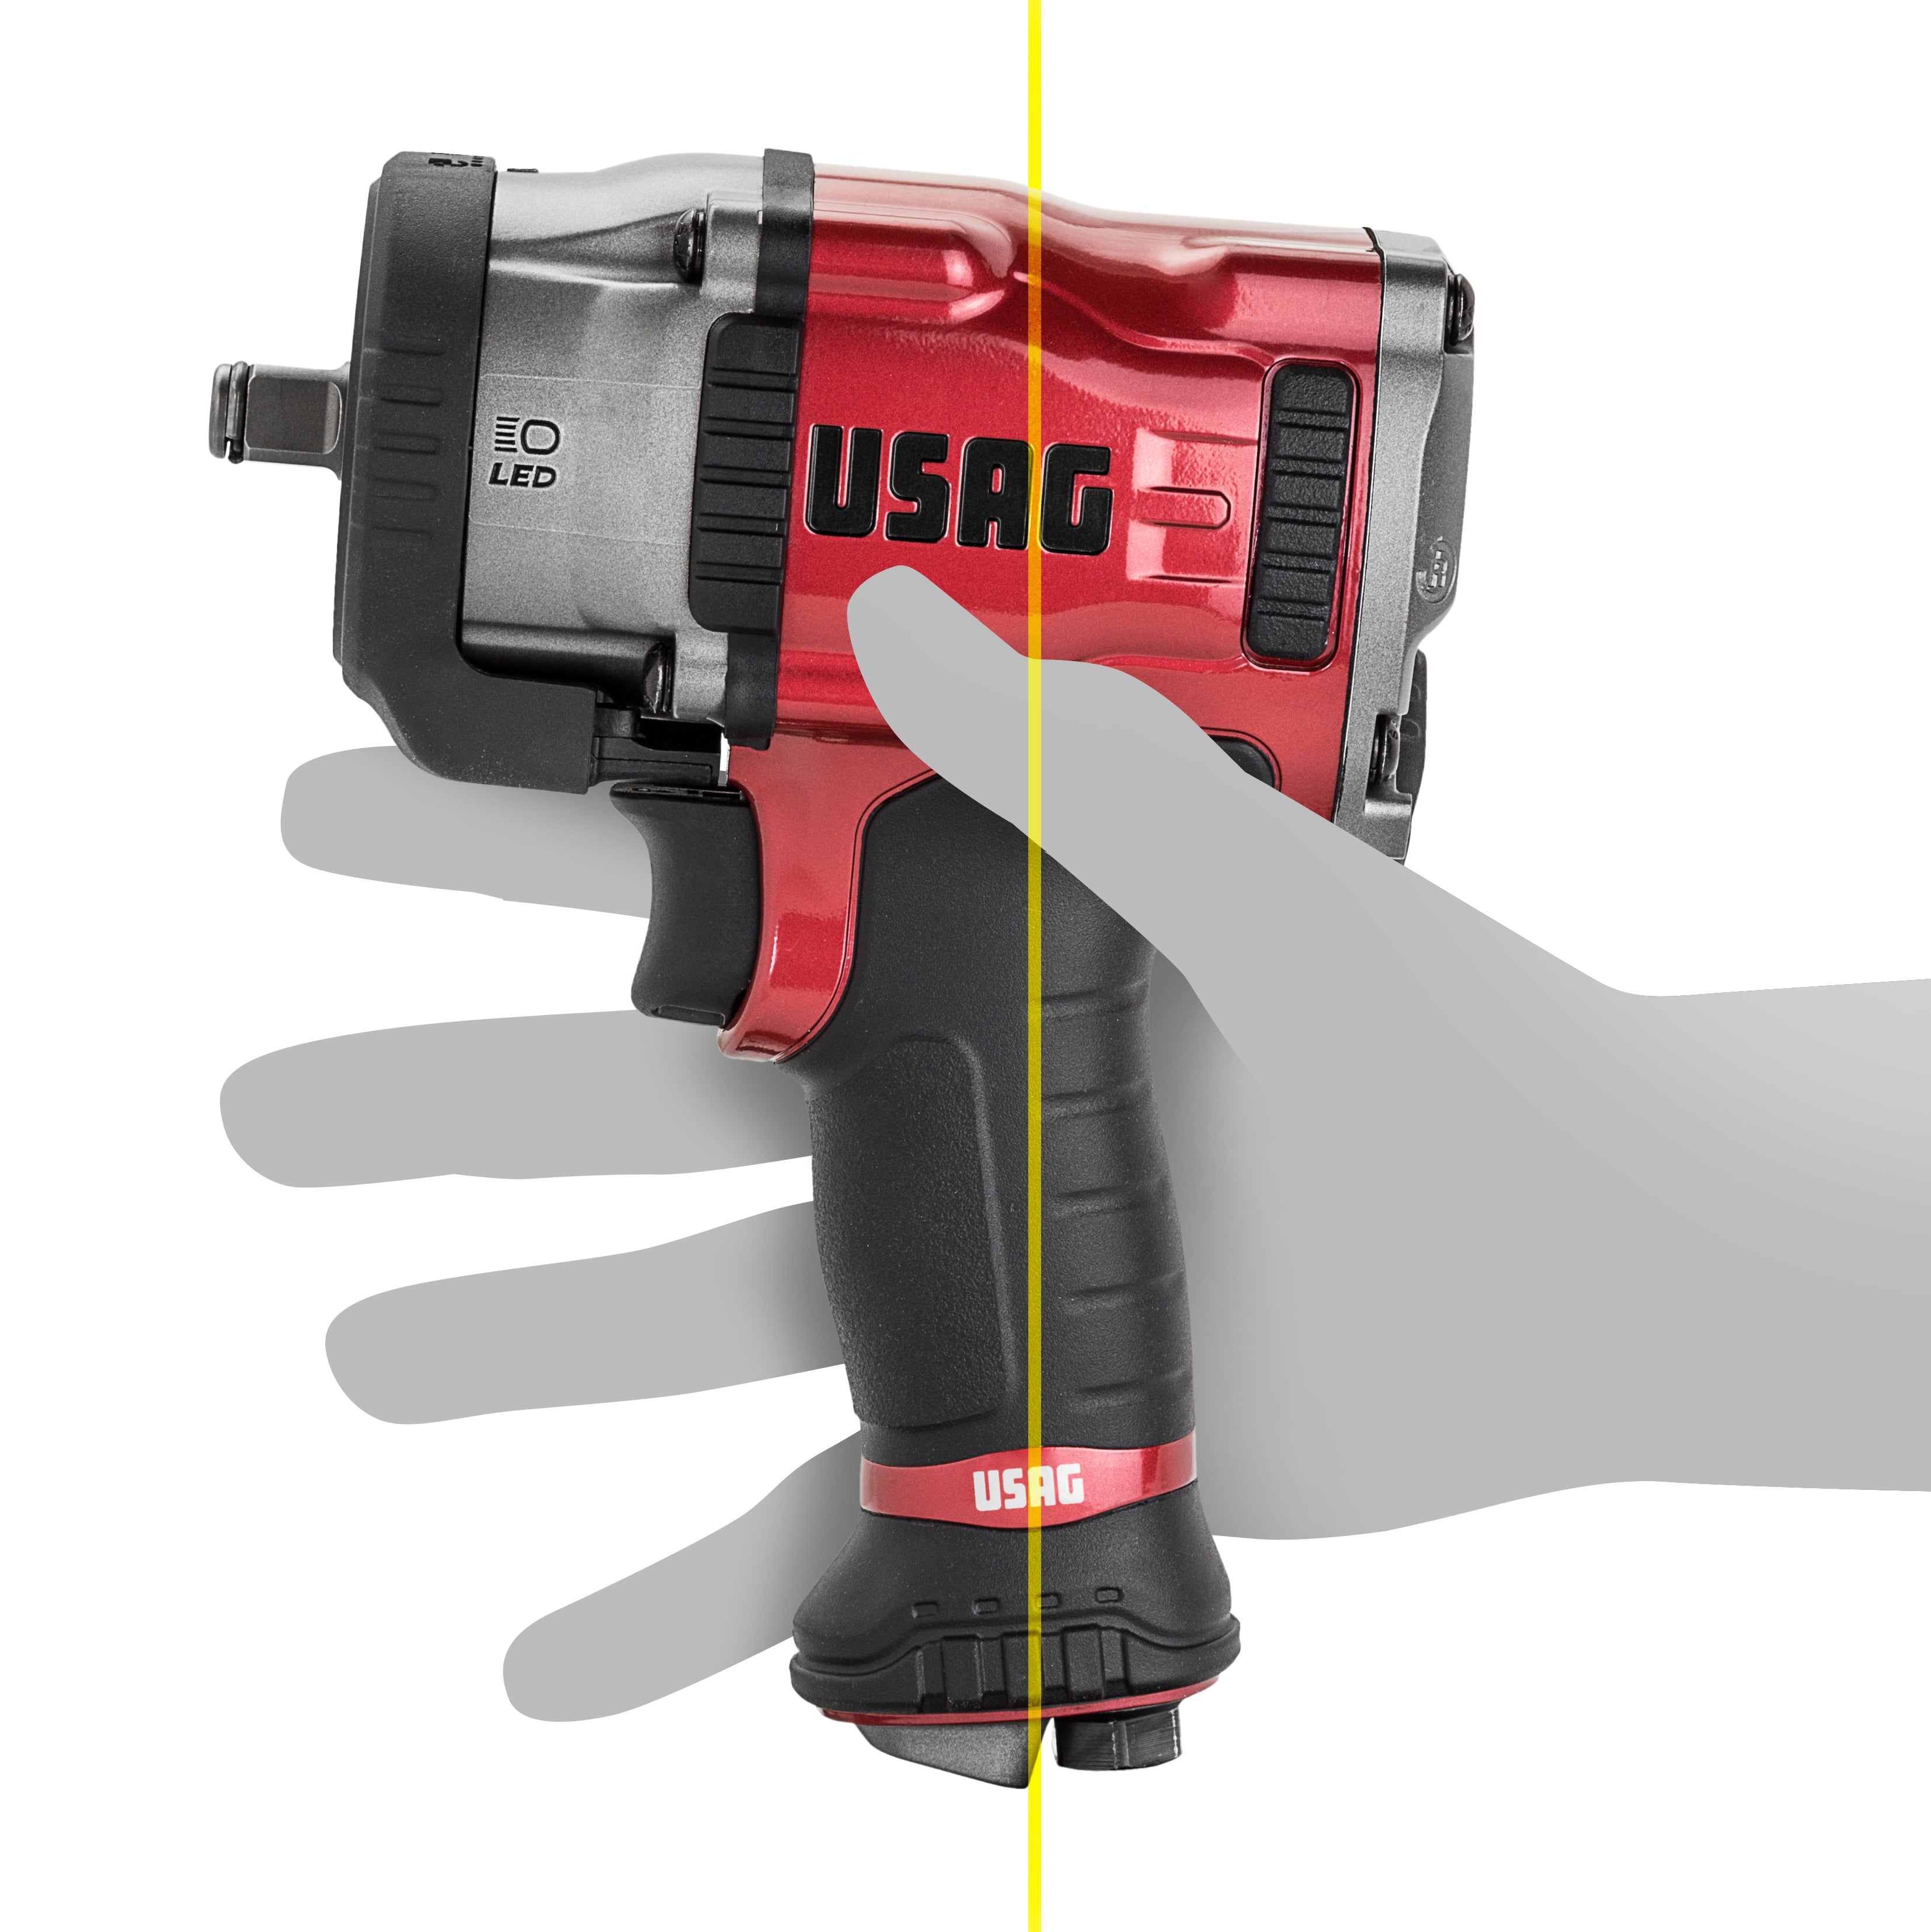 Magnesium impact wrench with led 162x75x212mm 2,2kg - Usag 943 PC1 1/2